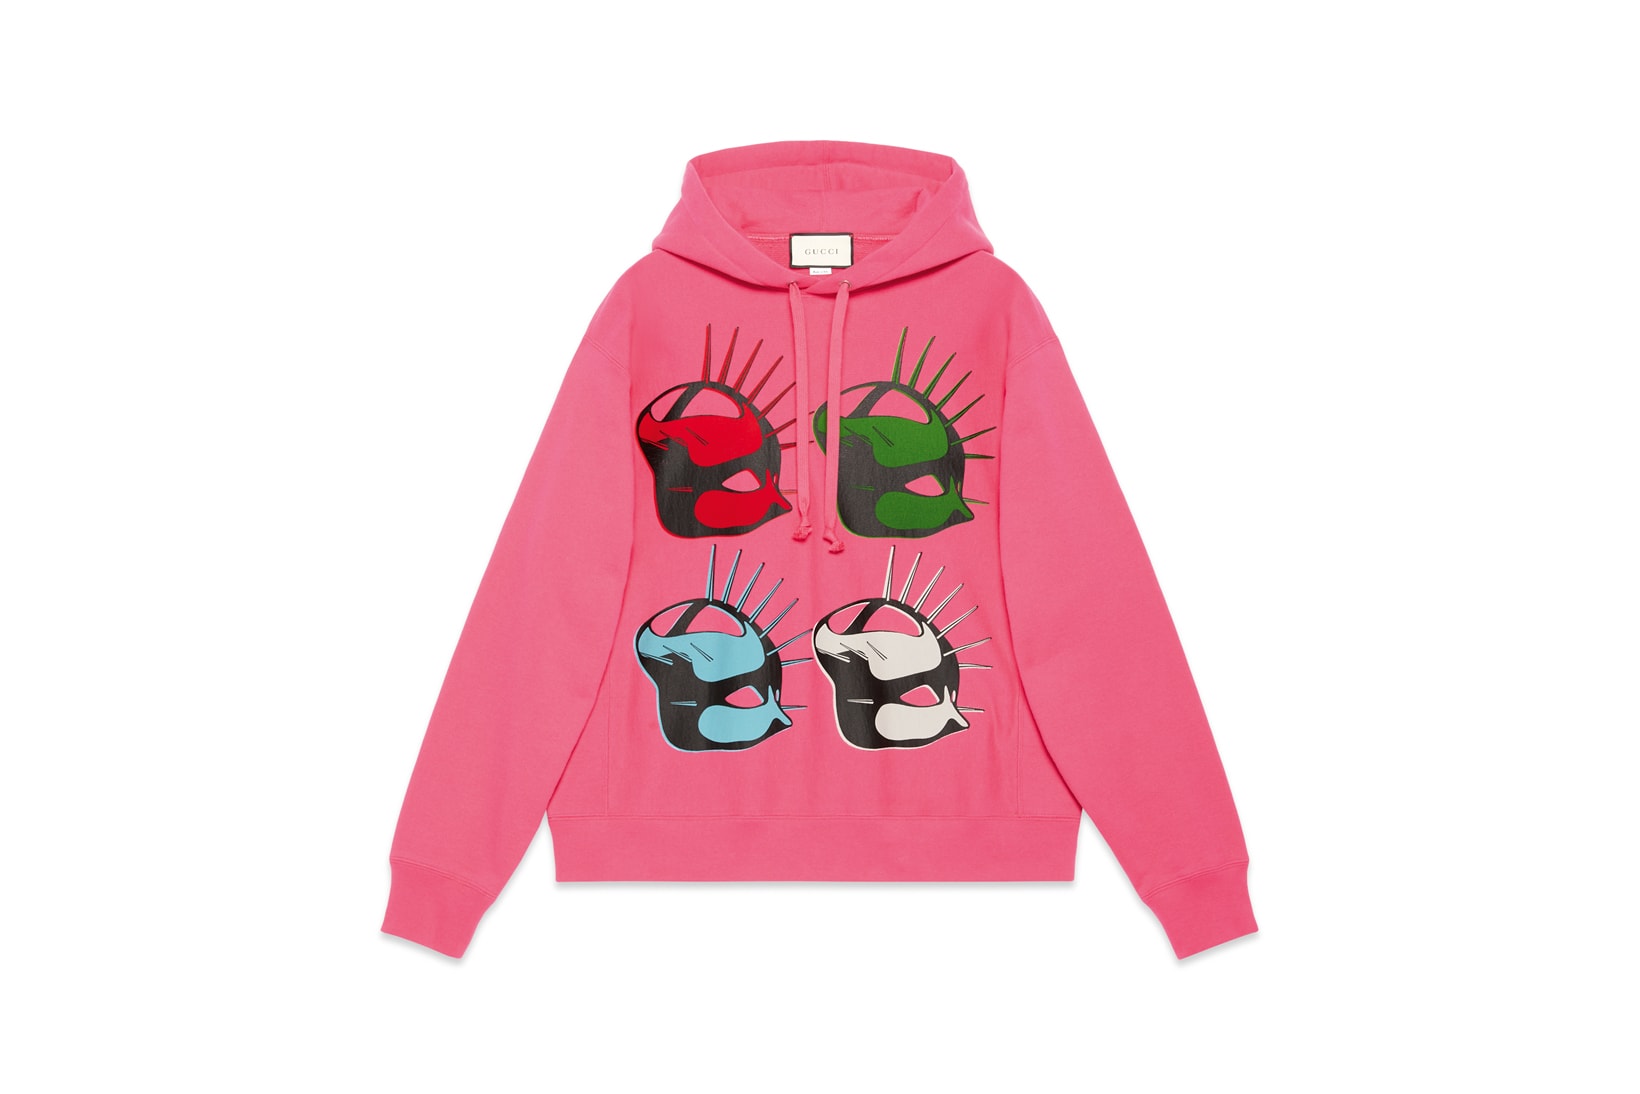 Gucci Manifesto Collection Hoodie Pink